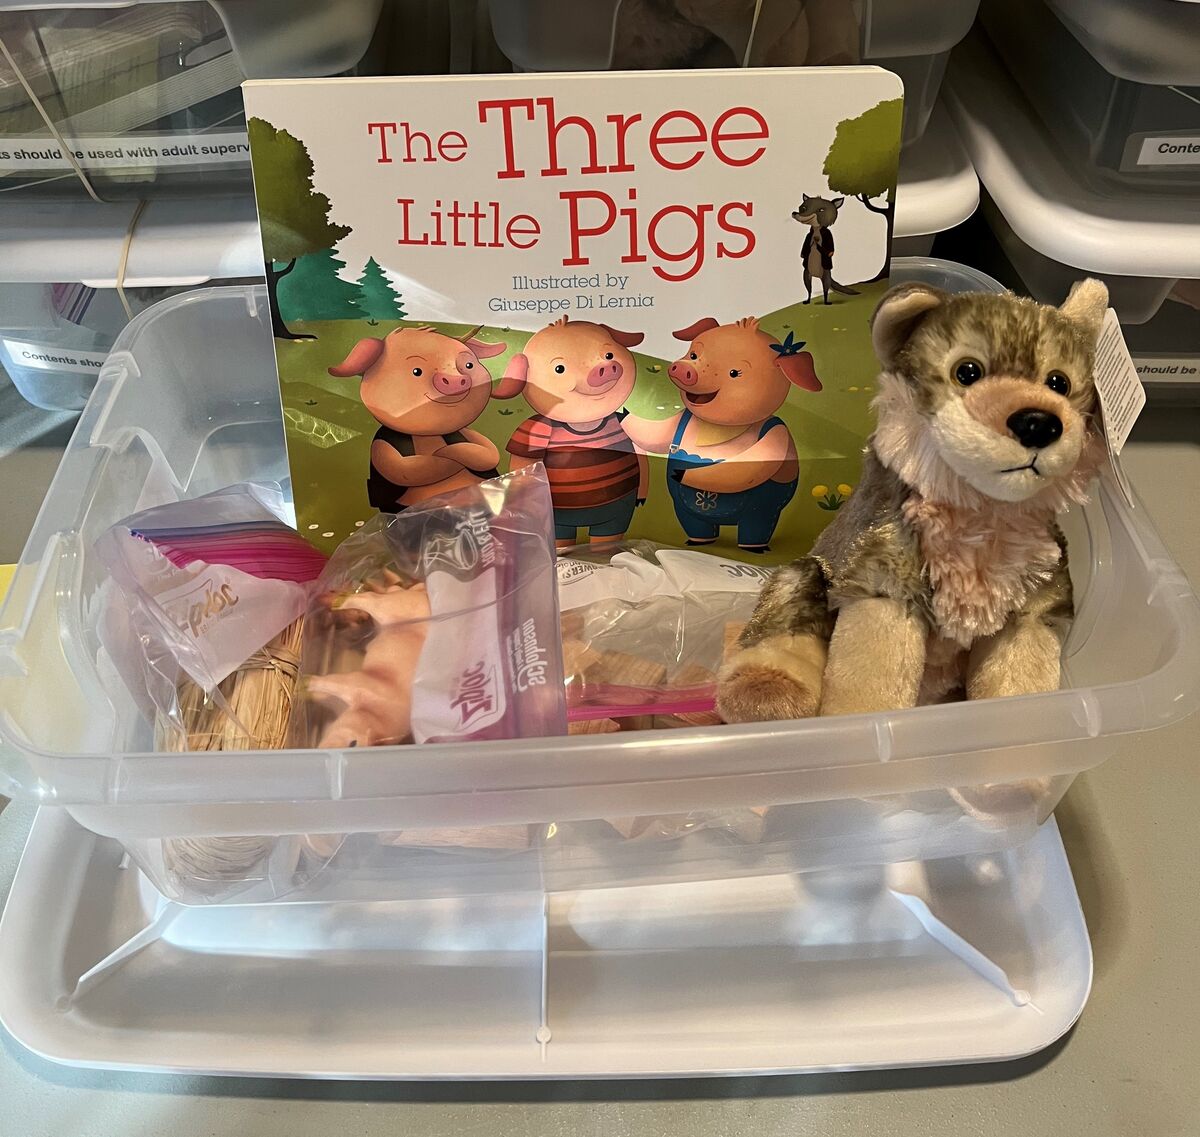 A story box shows the book of the three little pigs, a stuffed animal wolf, pig figurines, bundles of straw and sticks, and a few bricks. 